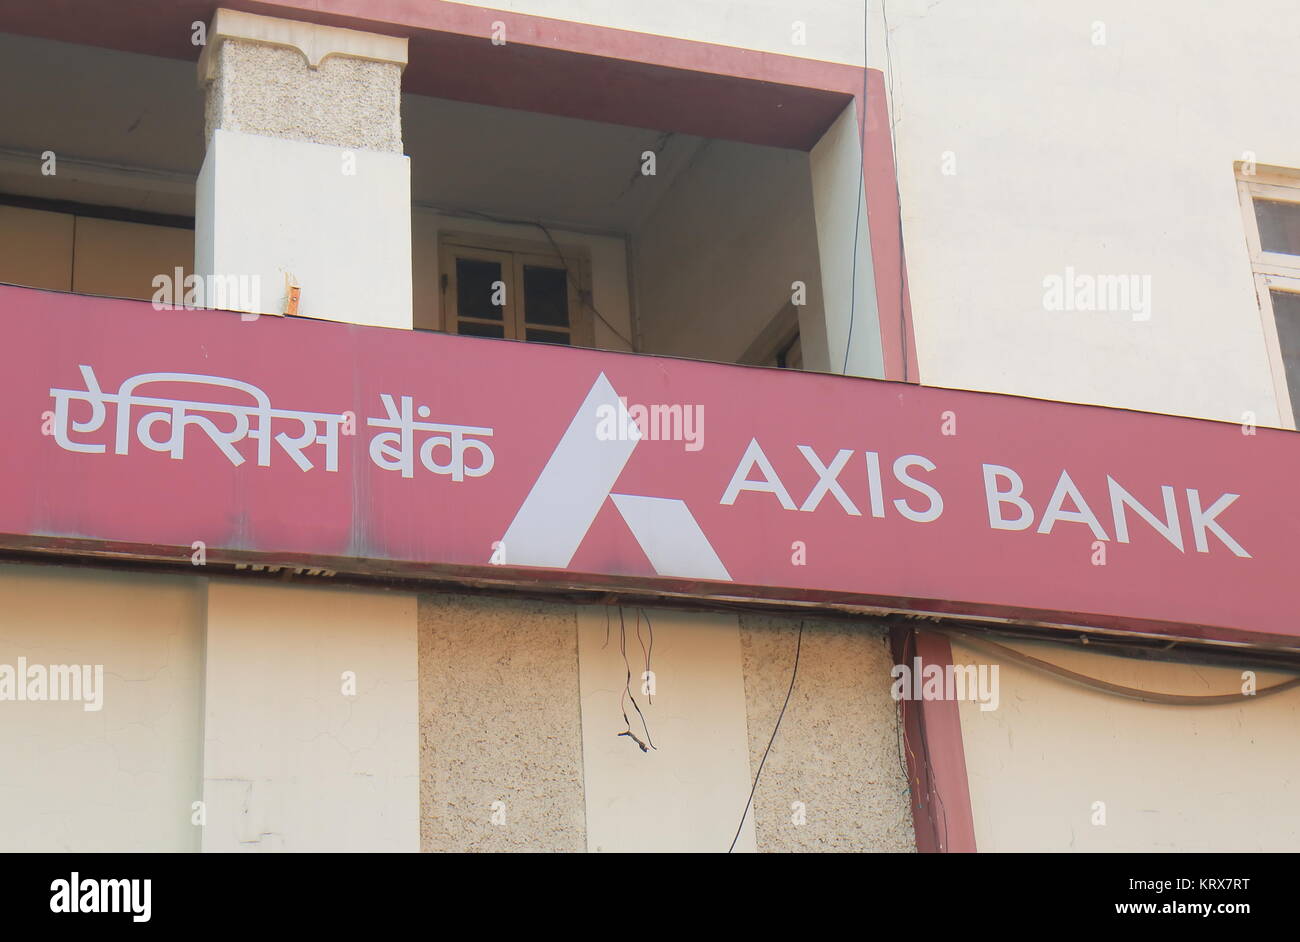 Axis Bank ATM Franchise